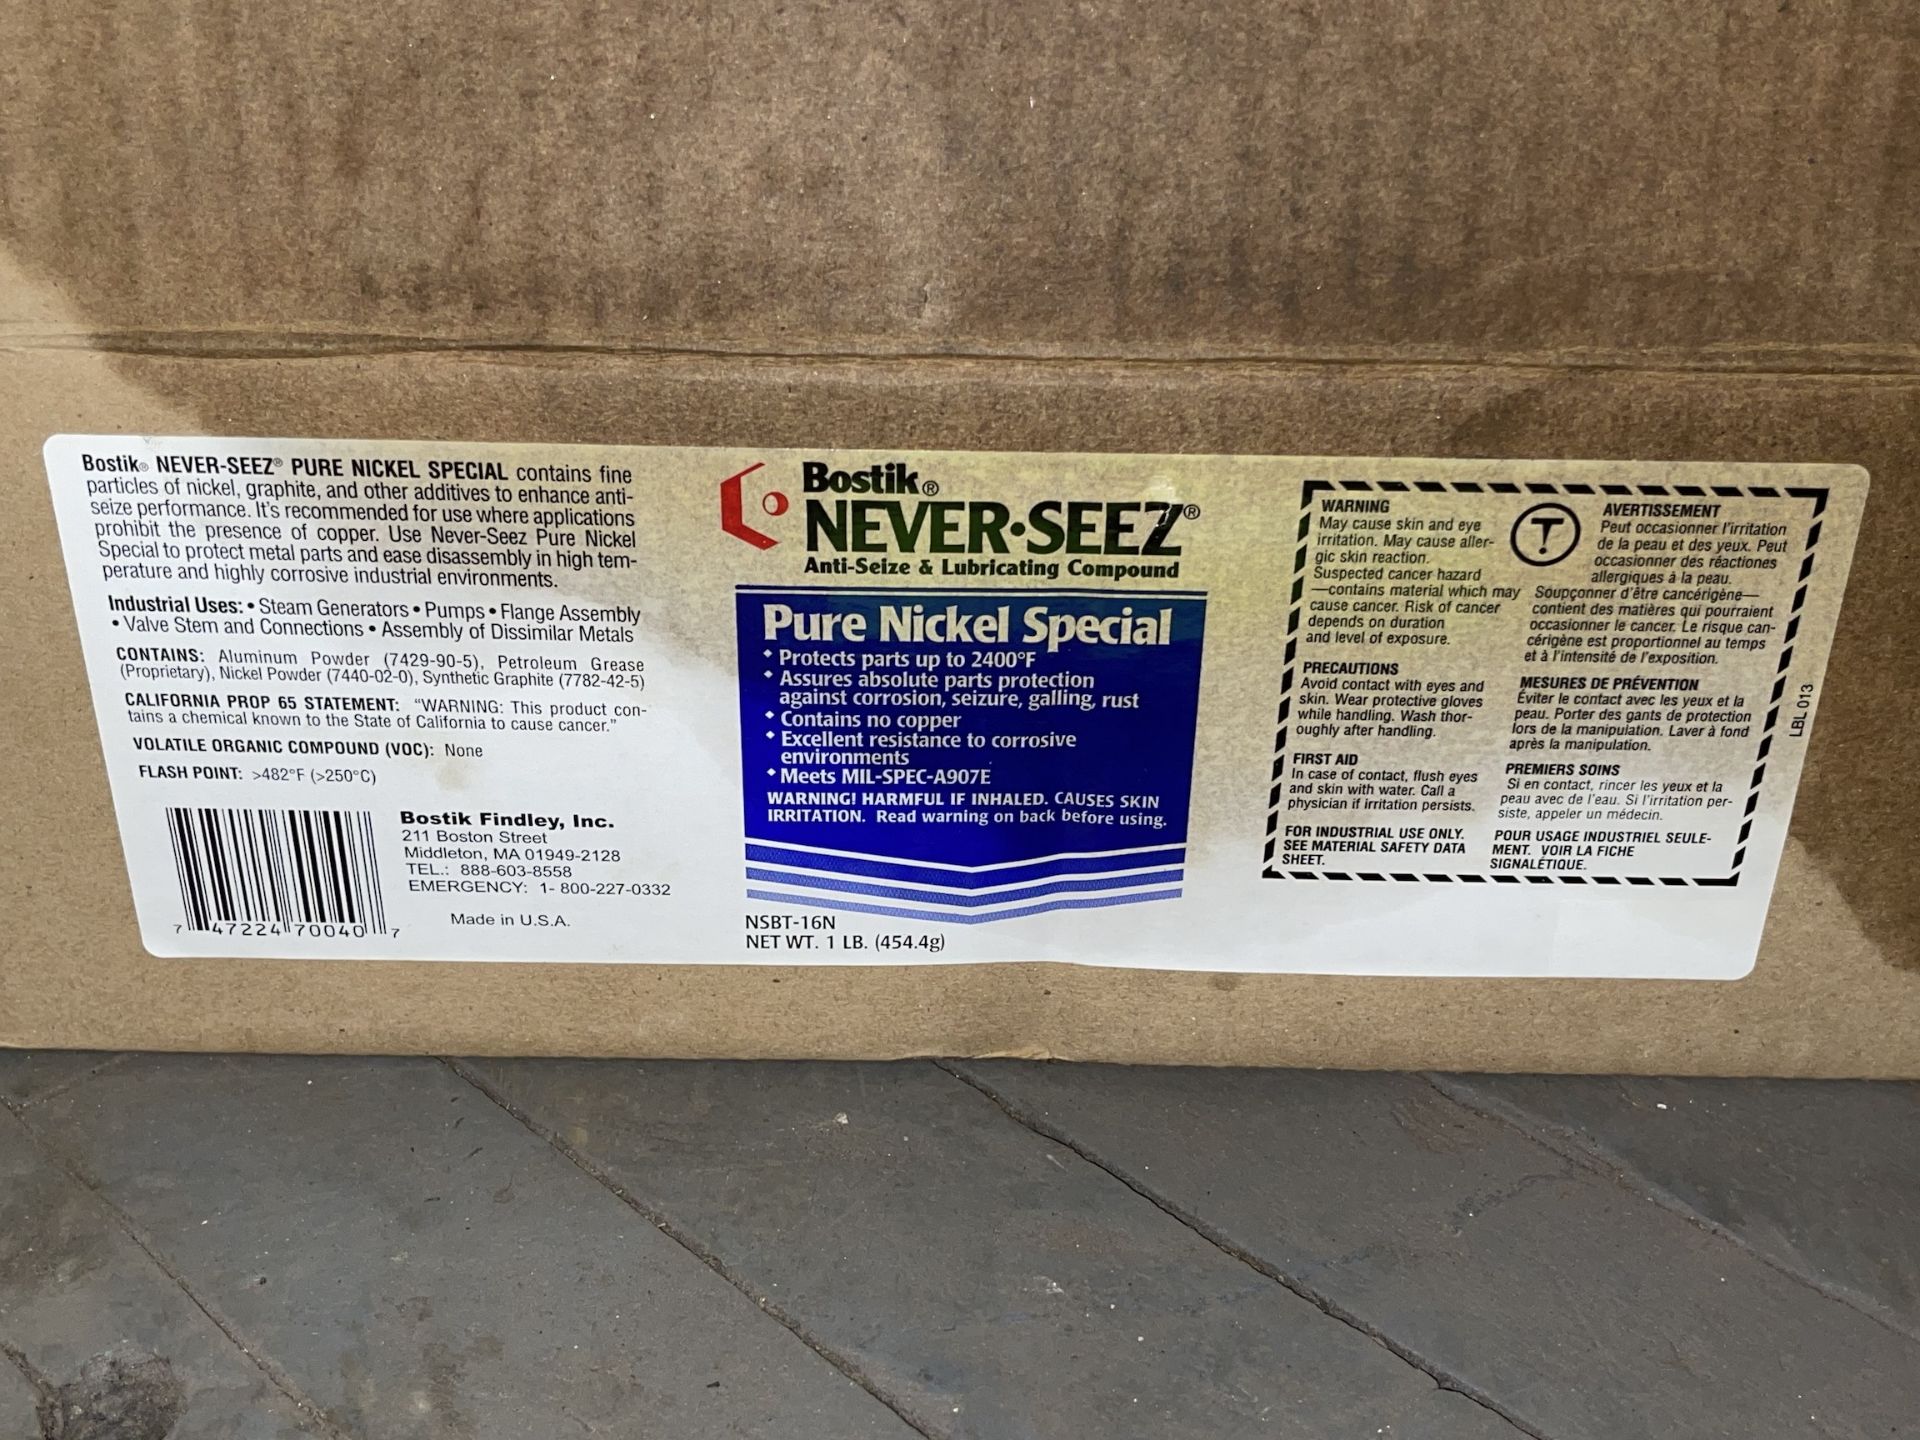 Lot of 13 Never Seez Anti-Seize & Lubricating Compound - Upland - Image 2 of 6